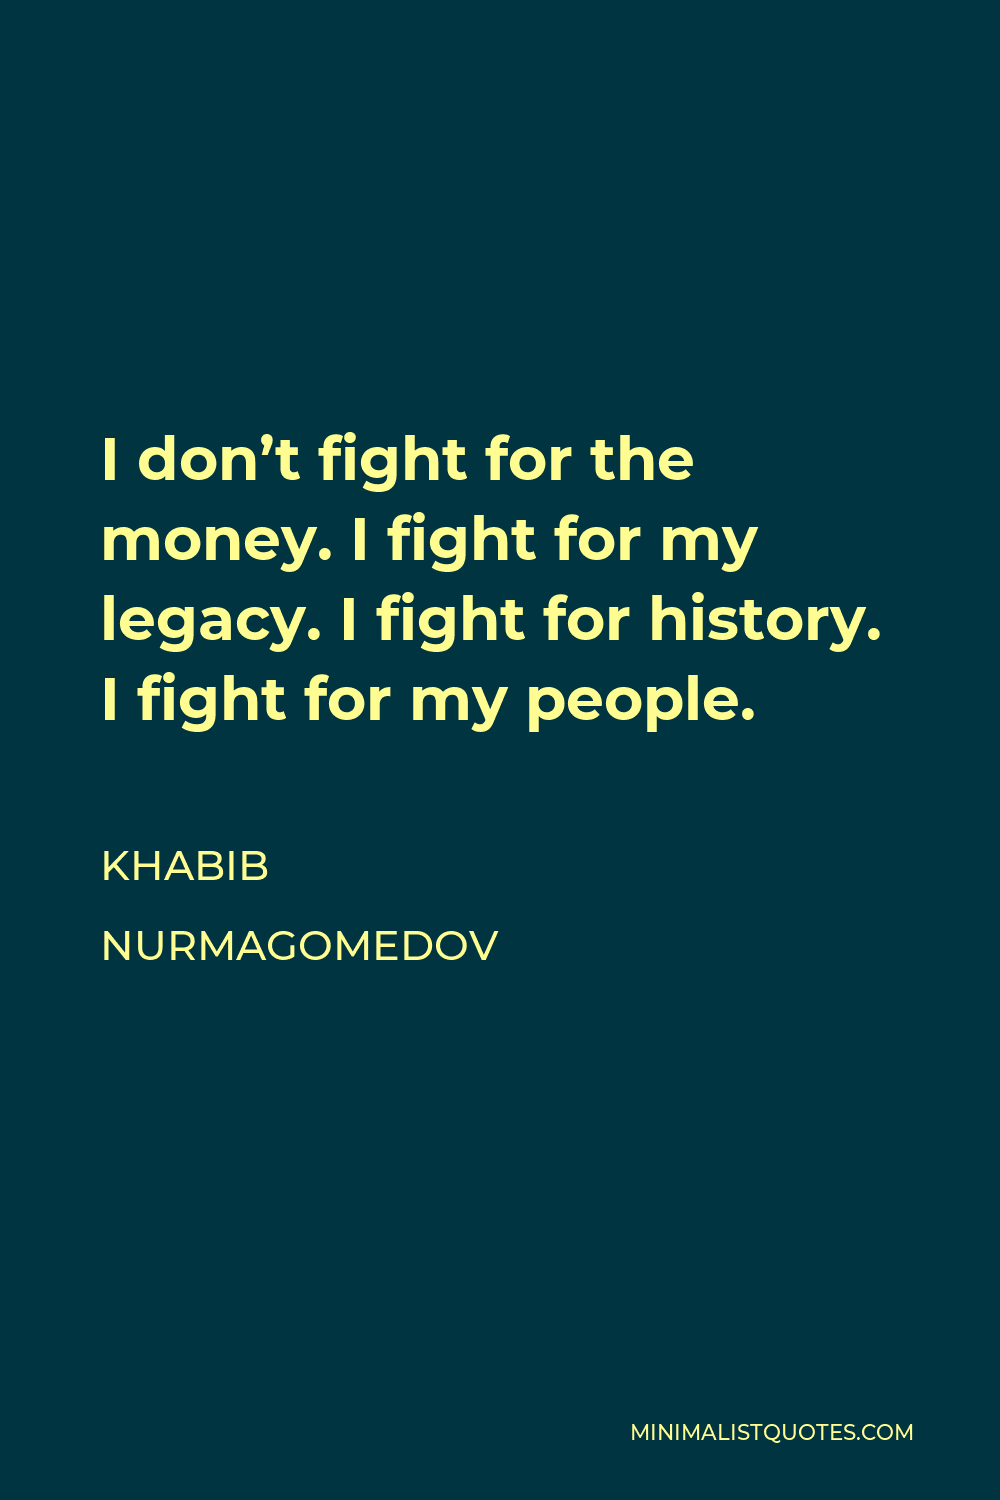 Khabib Nurmagomedov Quote - I don’t fight for the money. I fight for my legacy. I fight for history. I fight for my people.